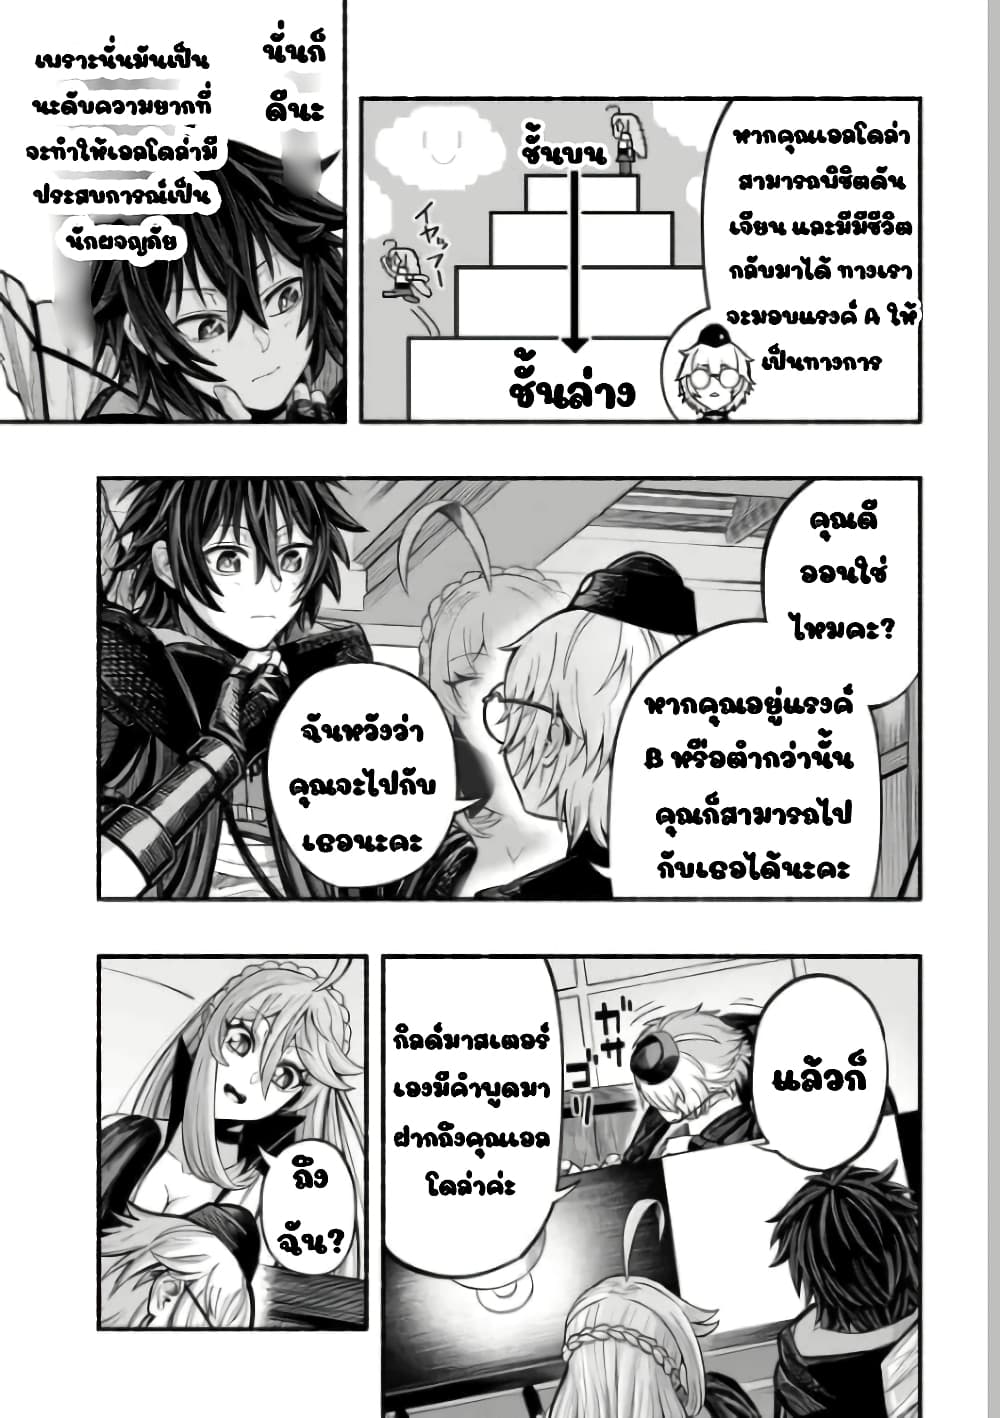 A Story About a Dragon and the Rising of an Adventurer ~ A Healer Who Was Seen as Useless and Was Kicked Out From an S Rank Party, Goes off to Revive the Strongest Dragon in an Abandoned Area 8.1-ข่าวลือของดีออน